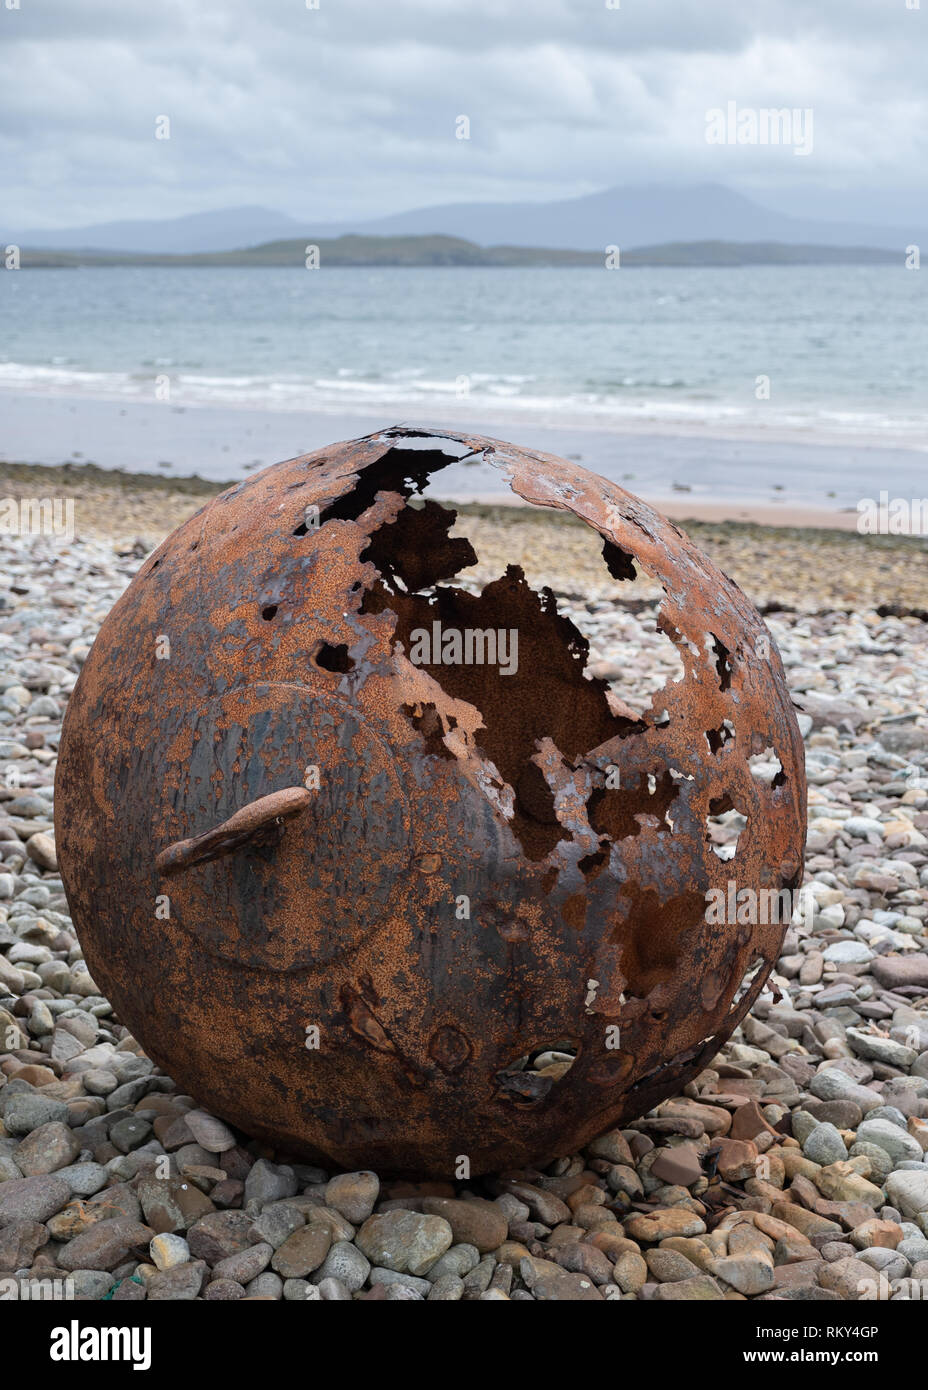 An old and rusty buoy stranded on a pebble beach near the shoreline on a cloudy day at Achiltibuie, Ross and Cromarty, Scotland Stock Photo